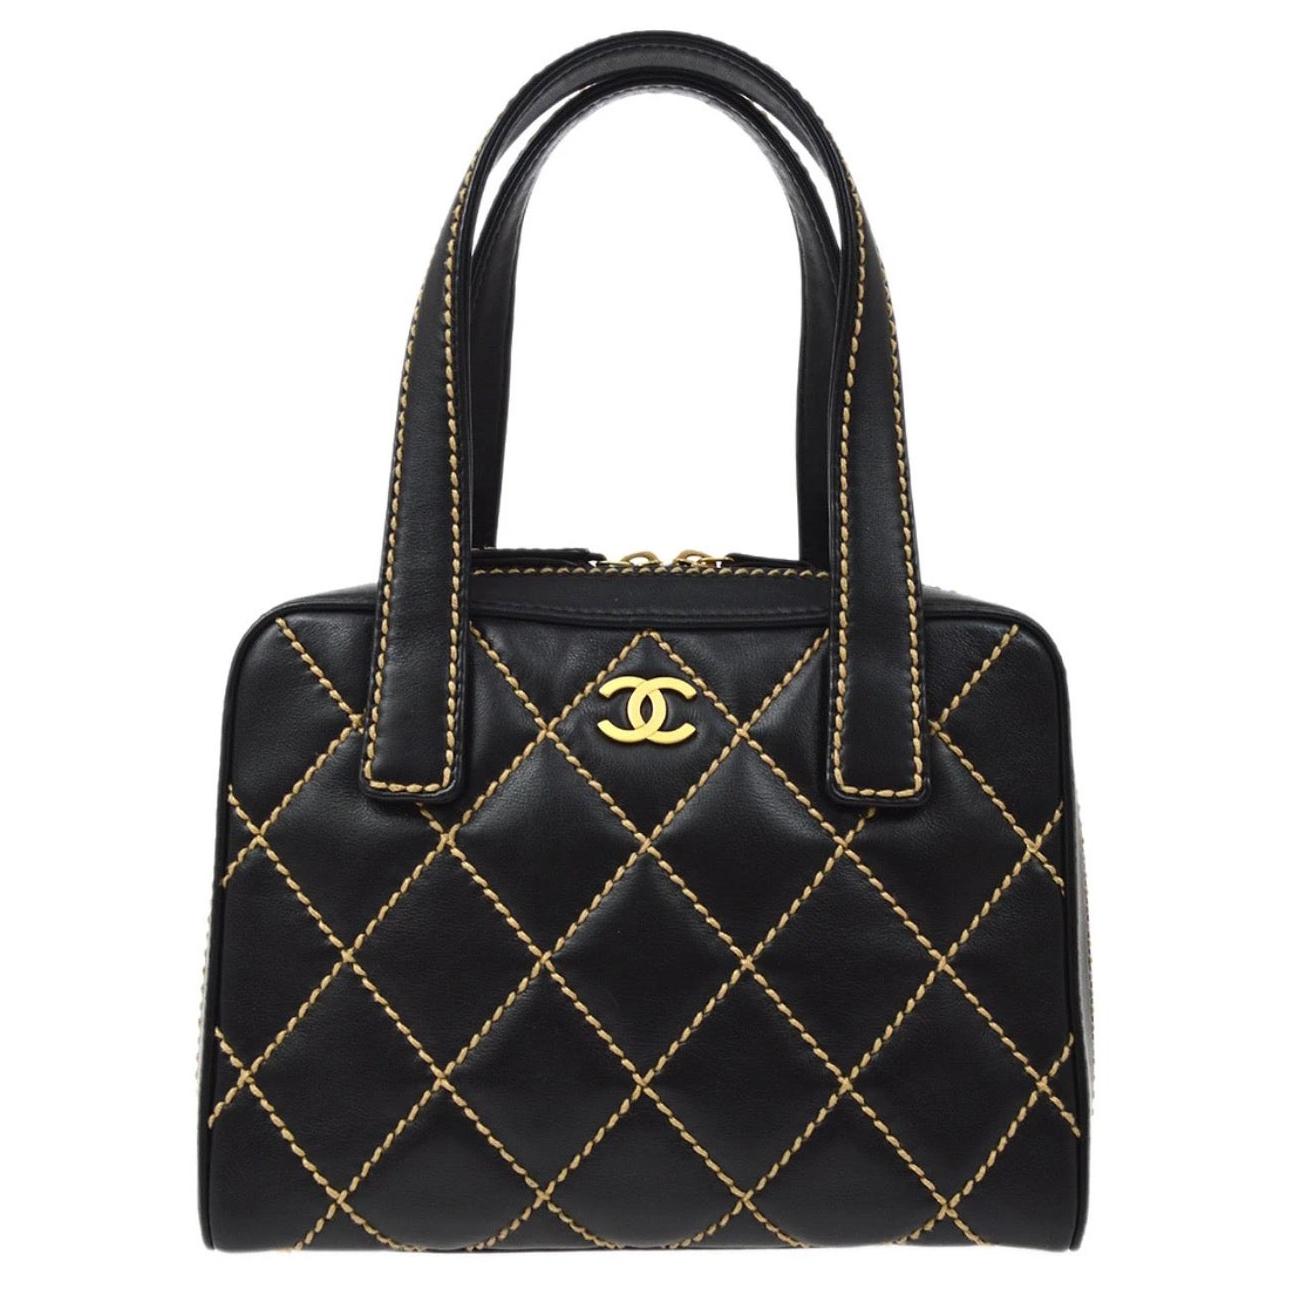 Chanel Black Tan Piping Leather Gold Small Mini Top Handle Satchel Bag